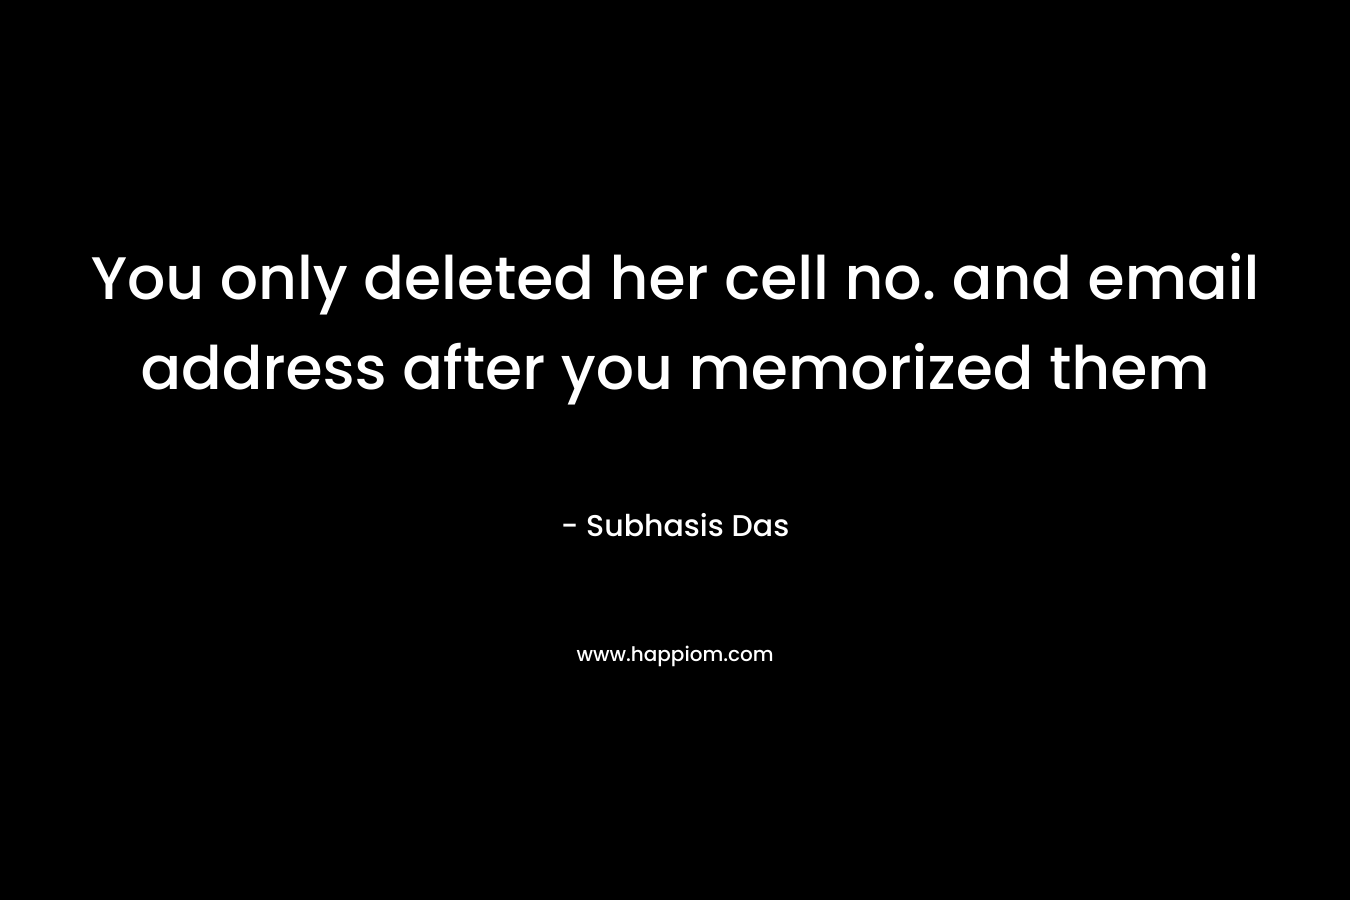 You only deleted her cell no. and email address after you memorized them – Subhasis Das